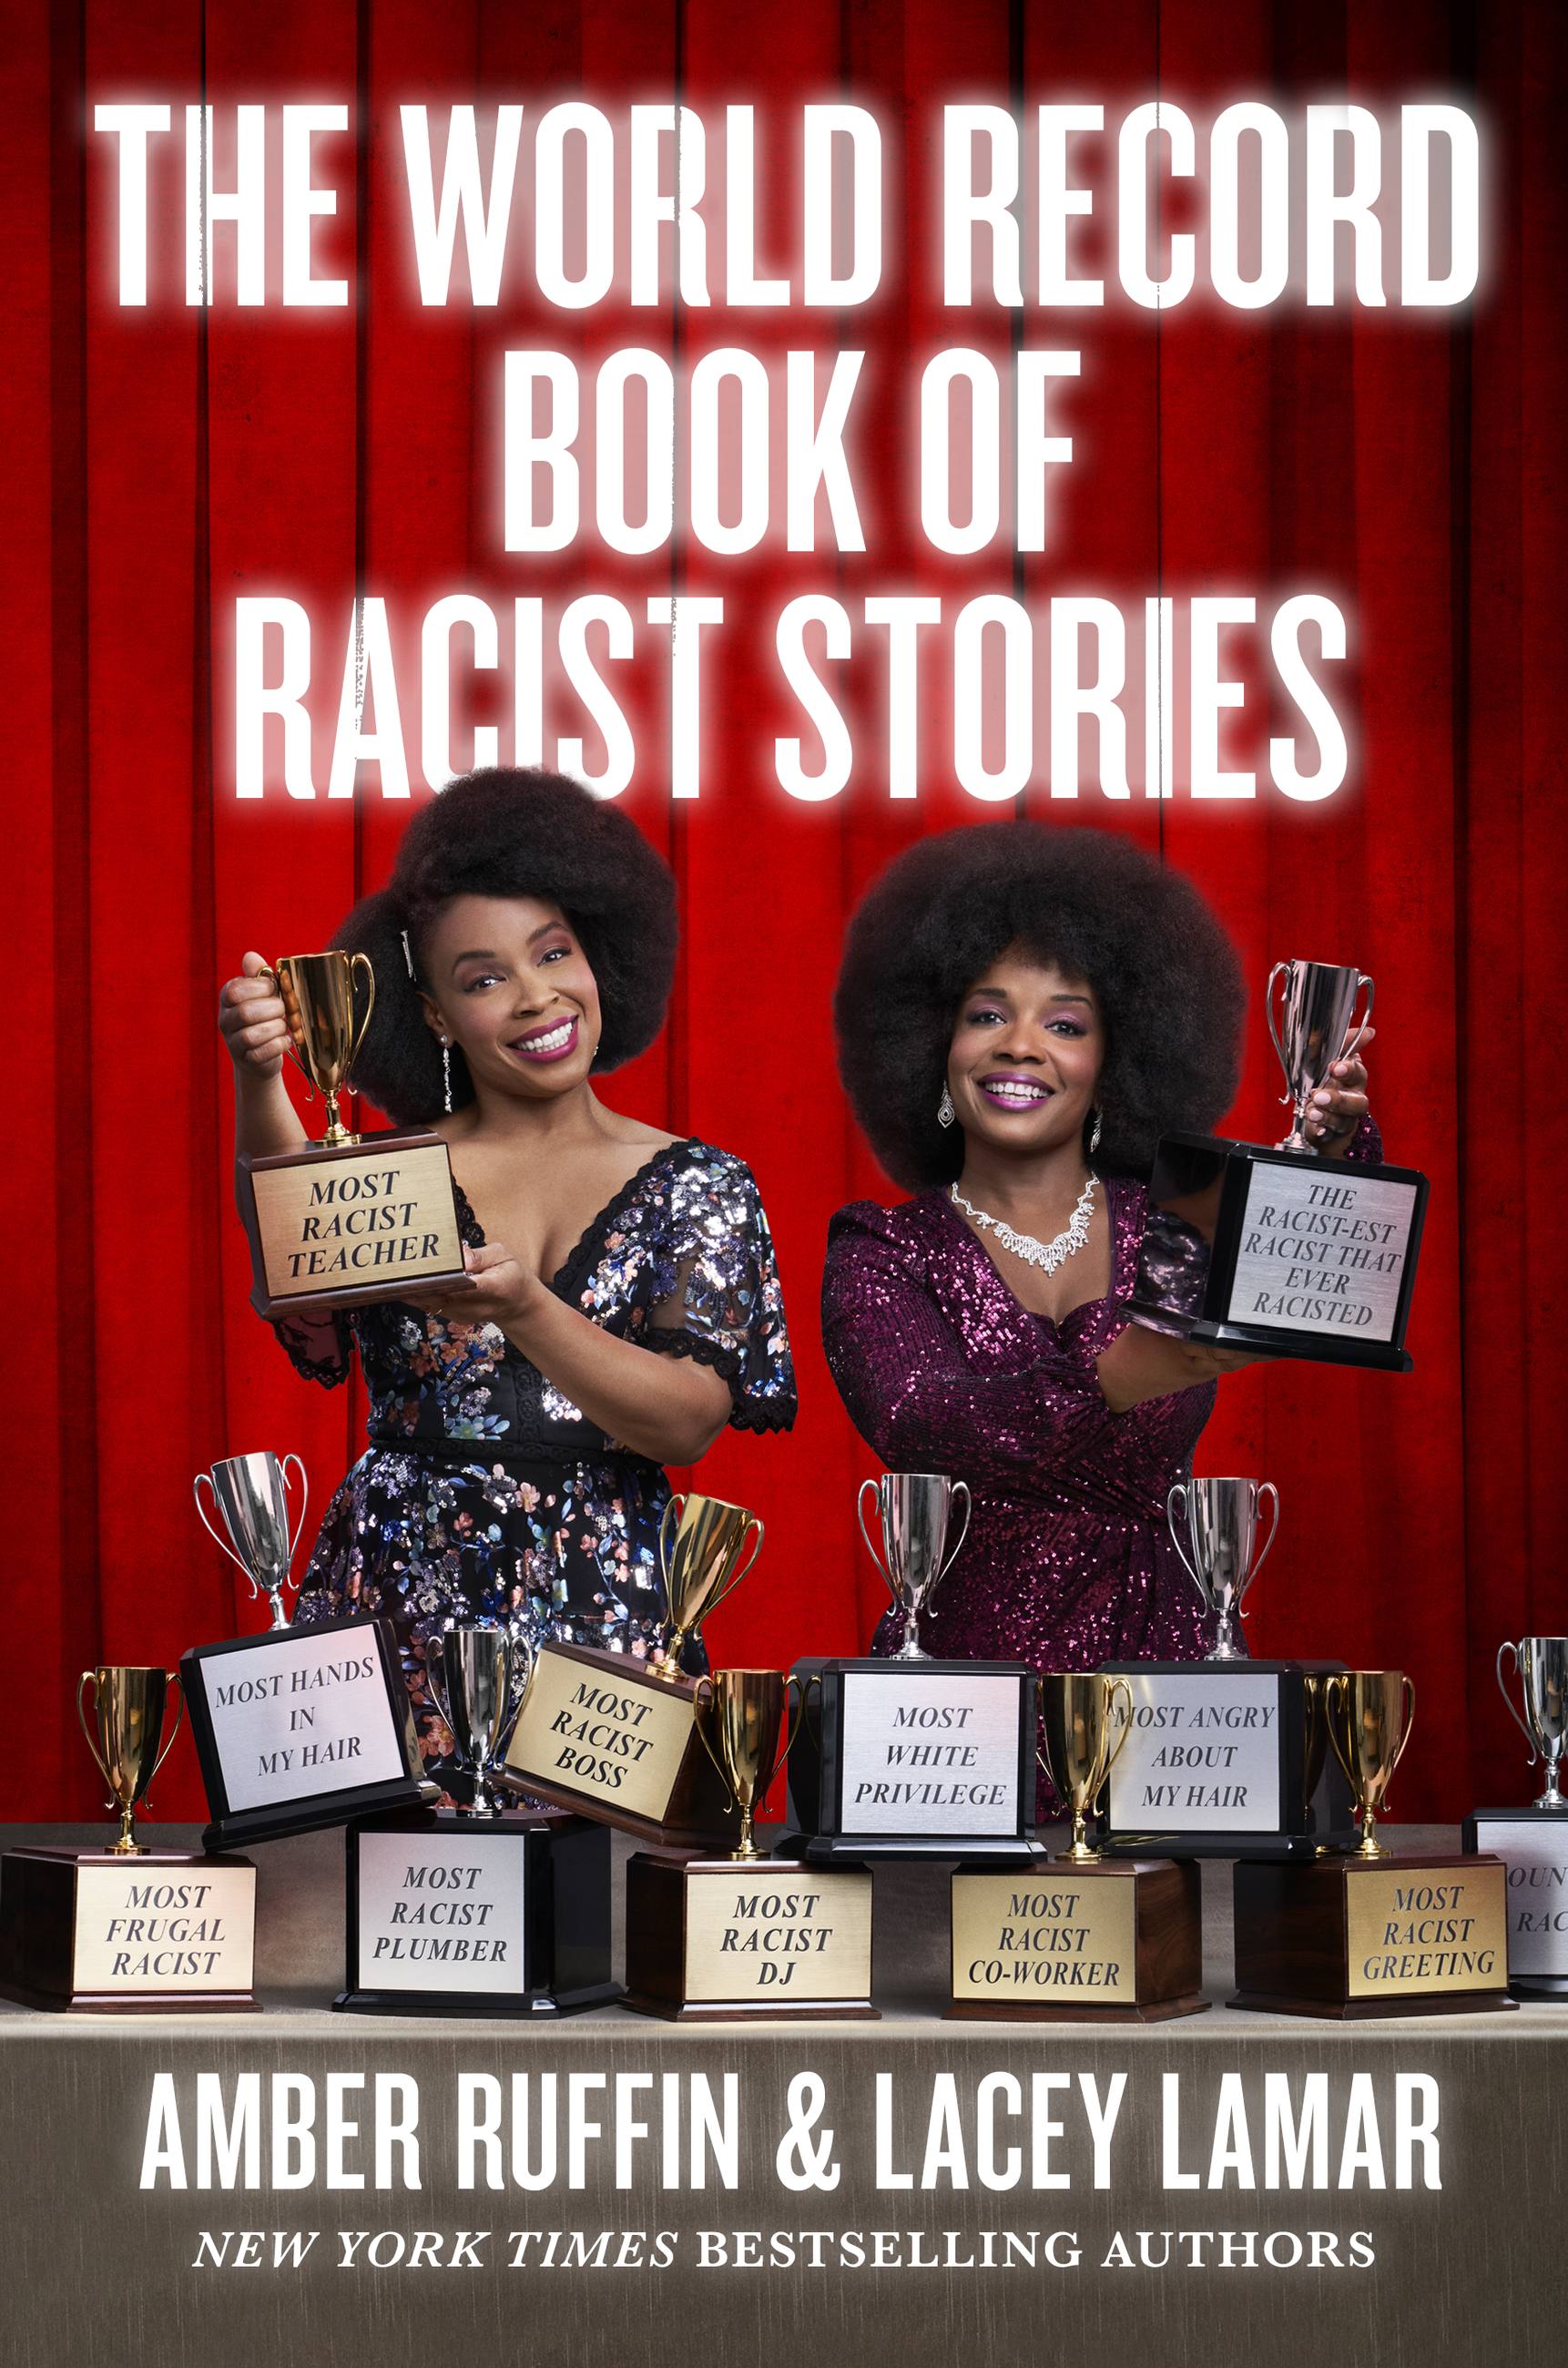 Owner Forced Worker To Fuck - The World Record Book of Racist Stories by Amber Ruffin & LACEY LAMAR |  Hachette Book Group